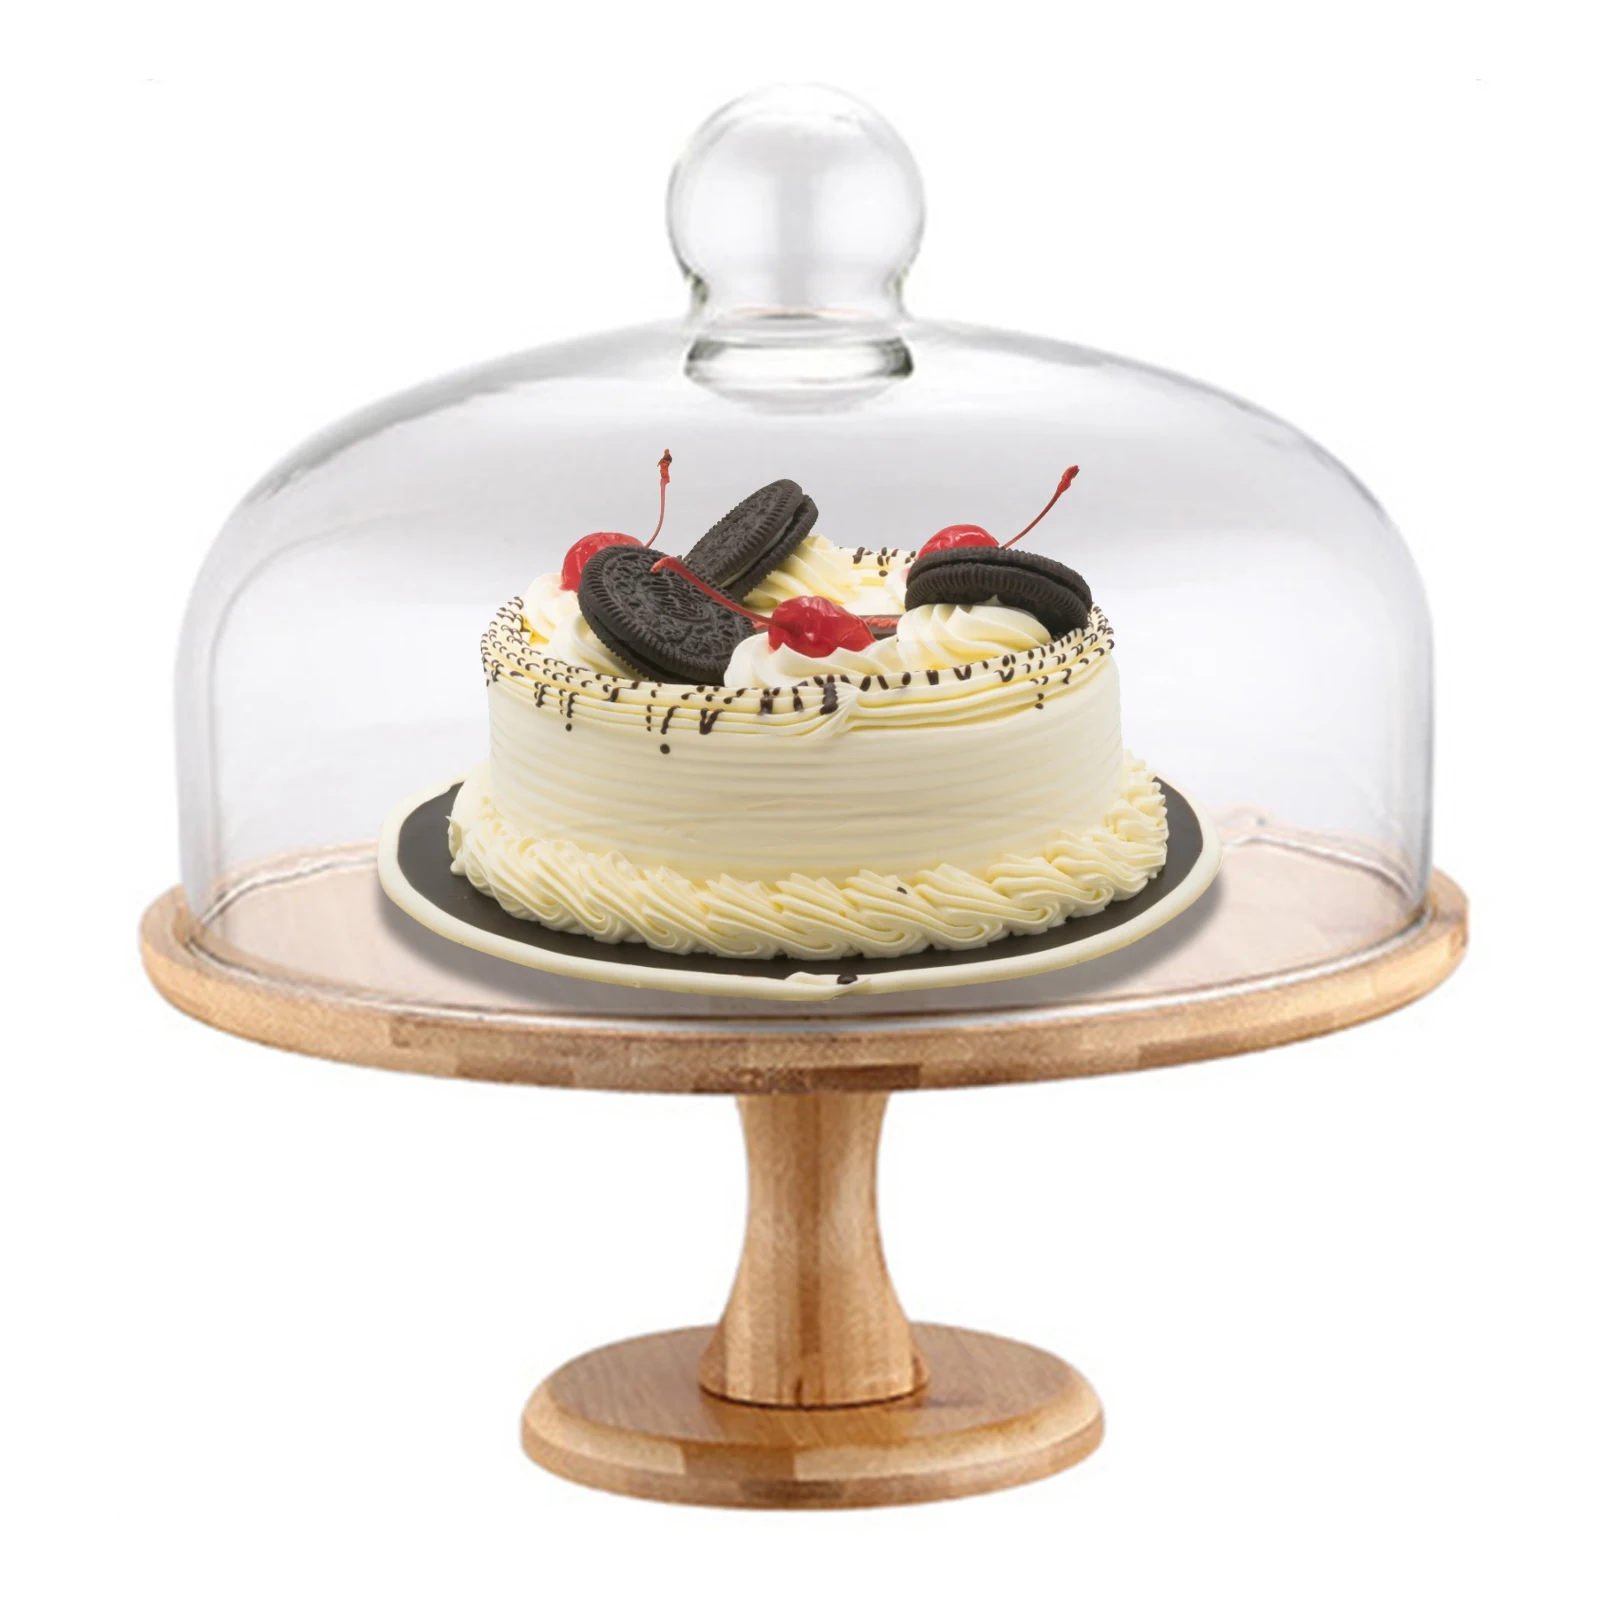 

Glass Dessert Stand Tray Tall Cake Plate Cake Plate Turntable Rotating Anti-skid Round Cake Stand Pan Baking Tool